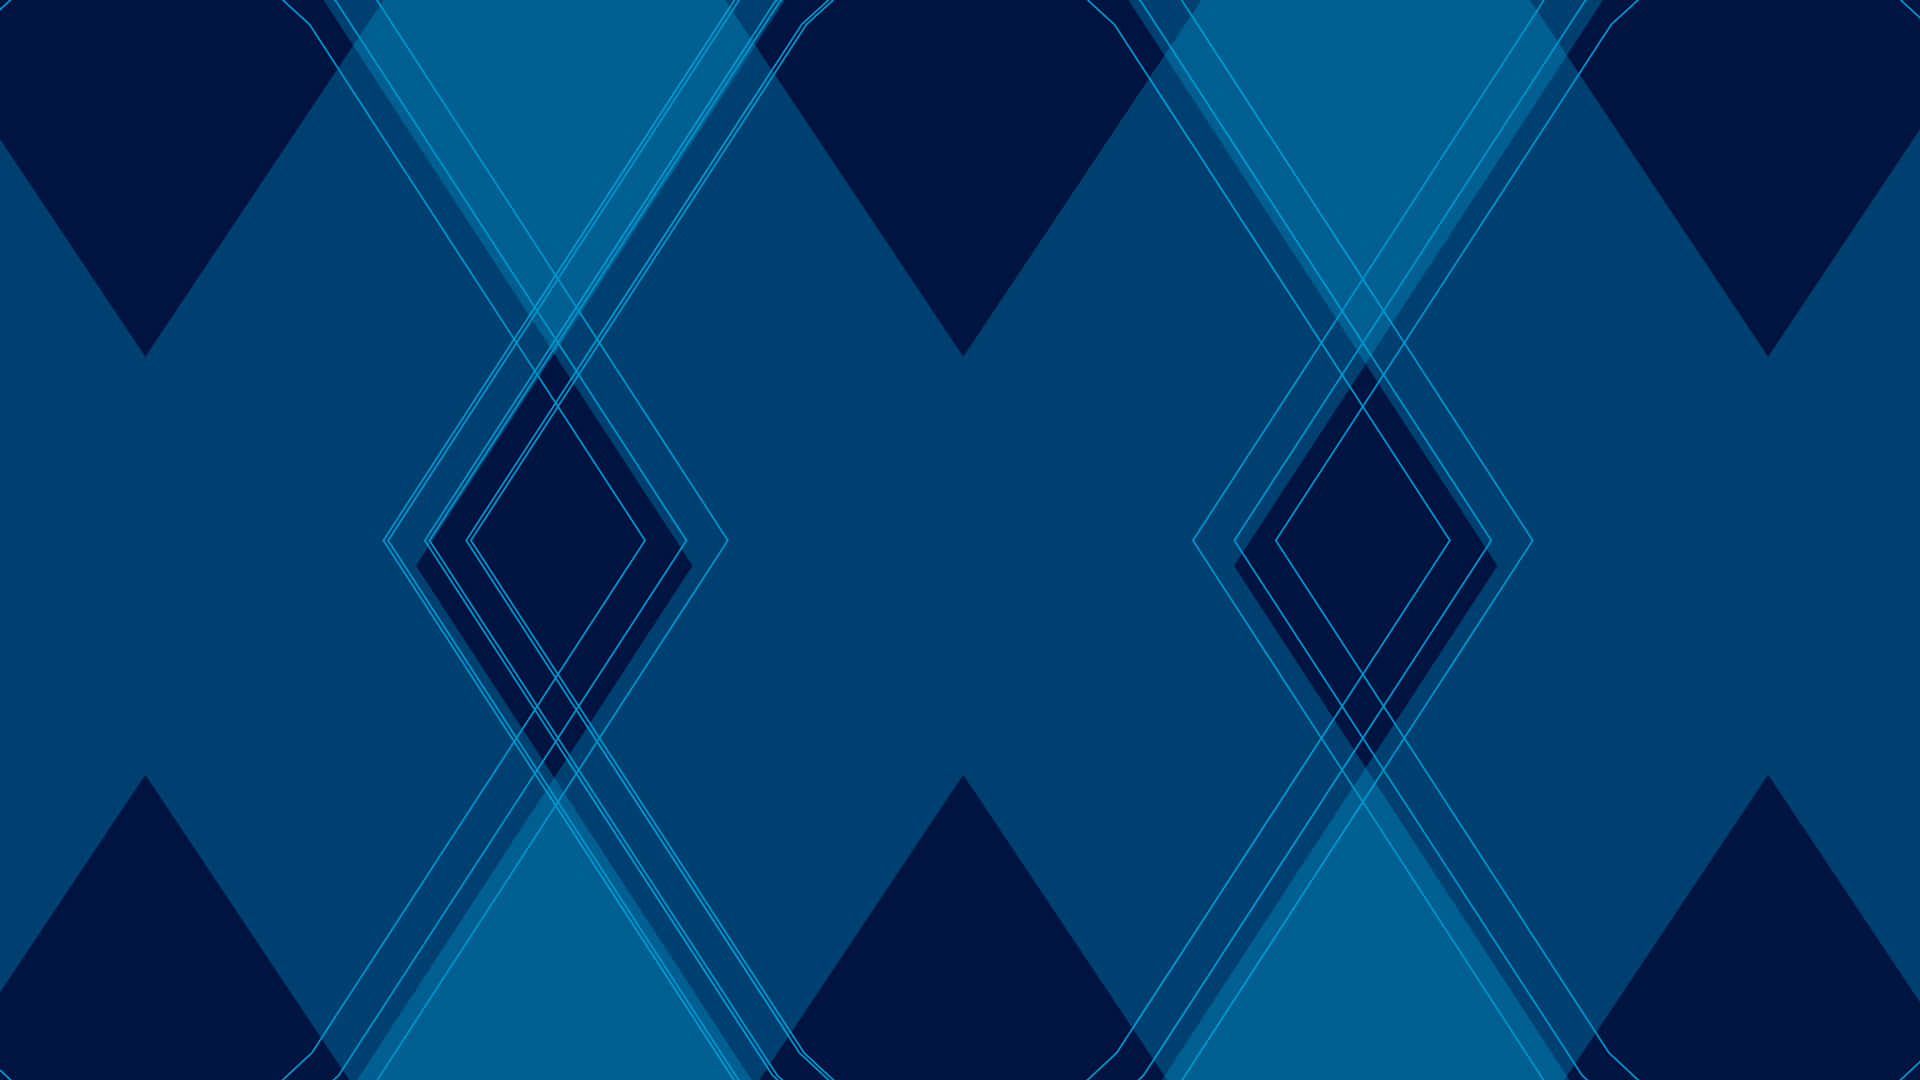 a blue and white argyle pattern